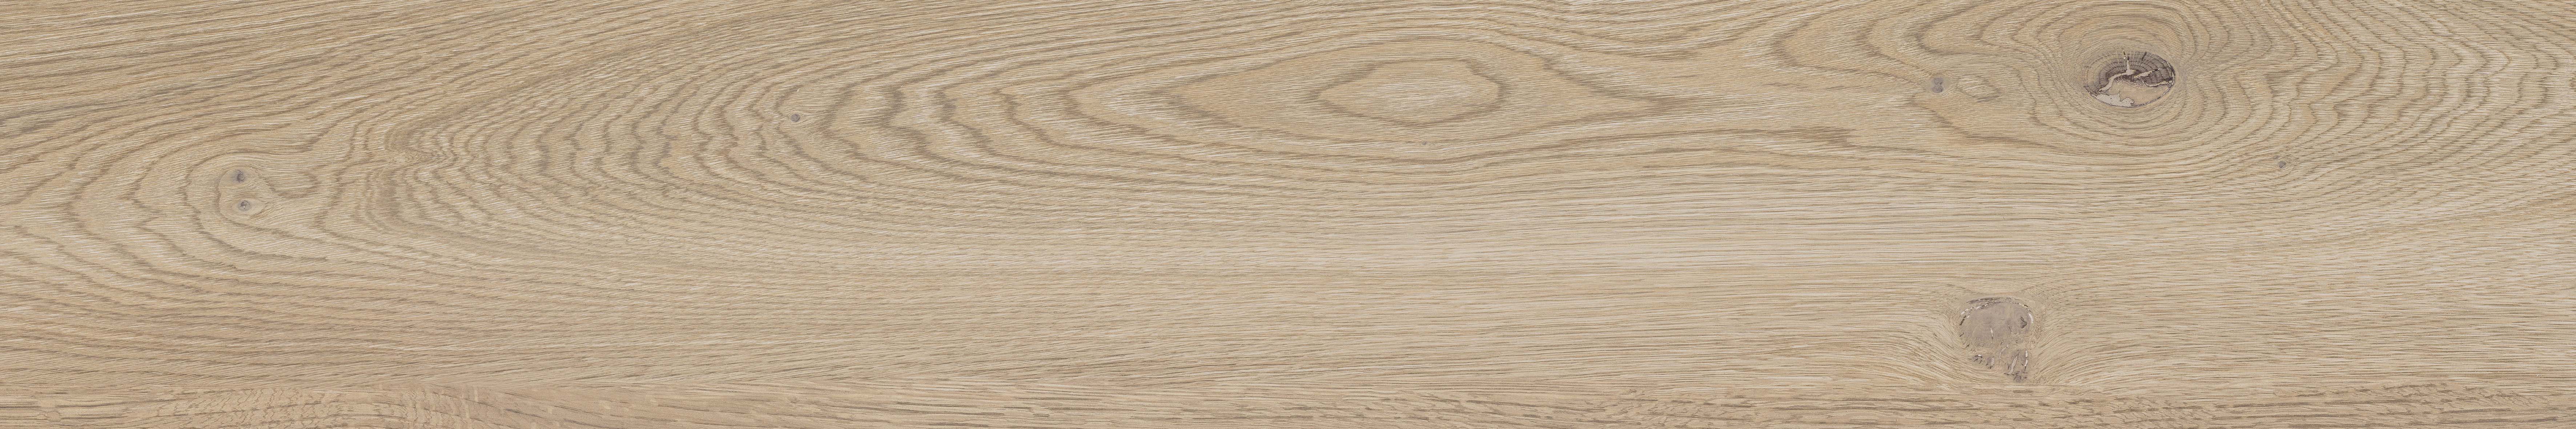 ABK Poetry Wood Gold Naturale PF60010058 20x120cm rectified 8,5mm